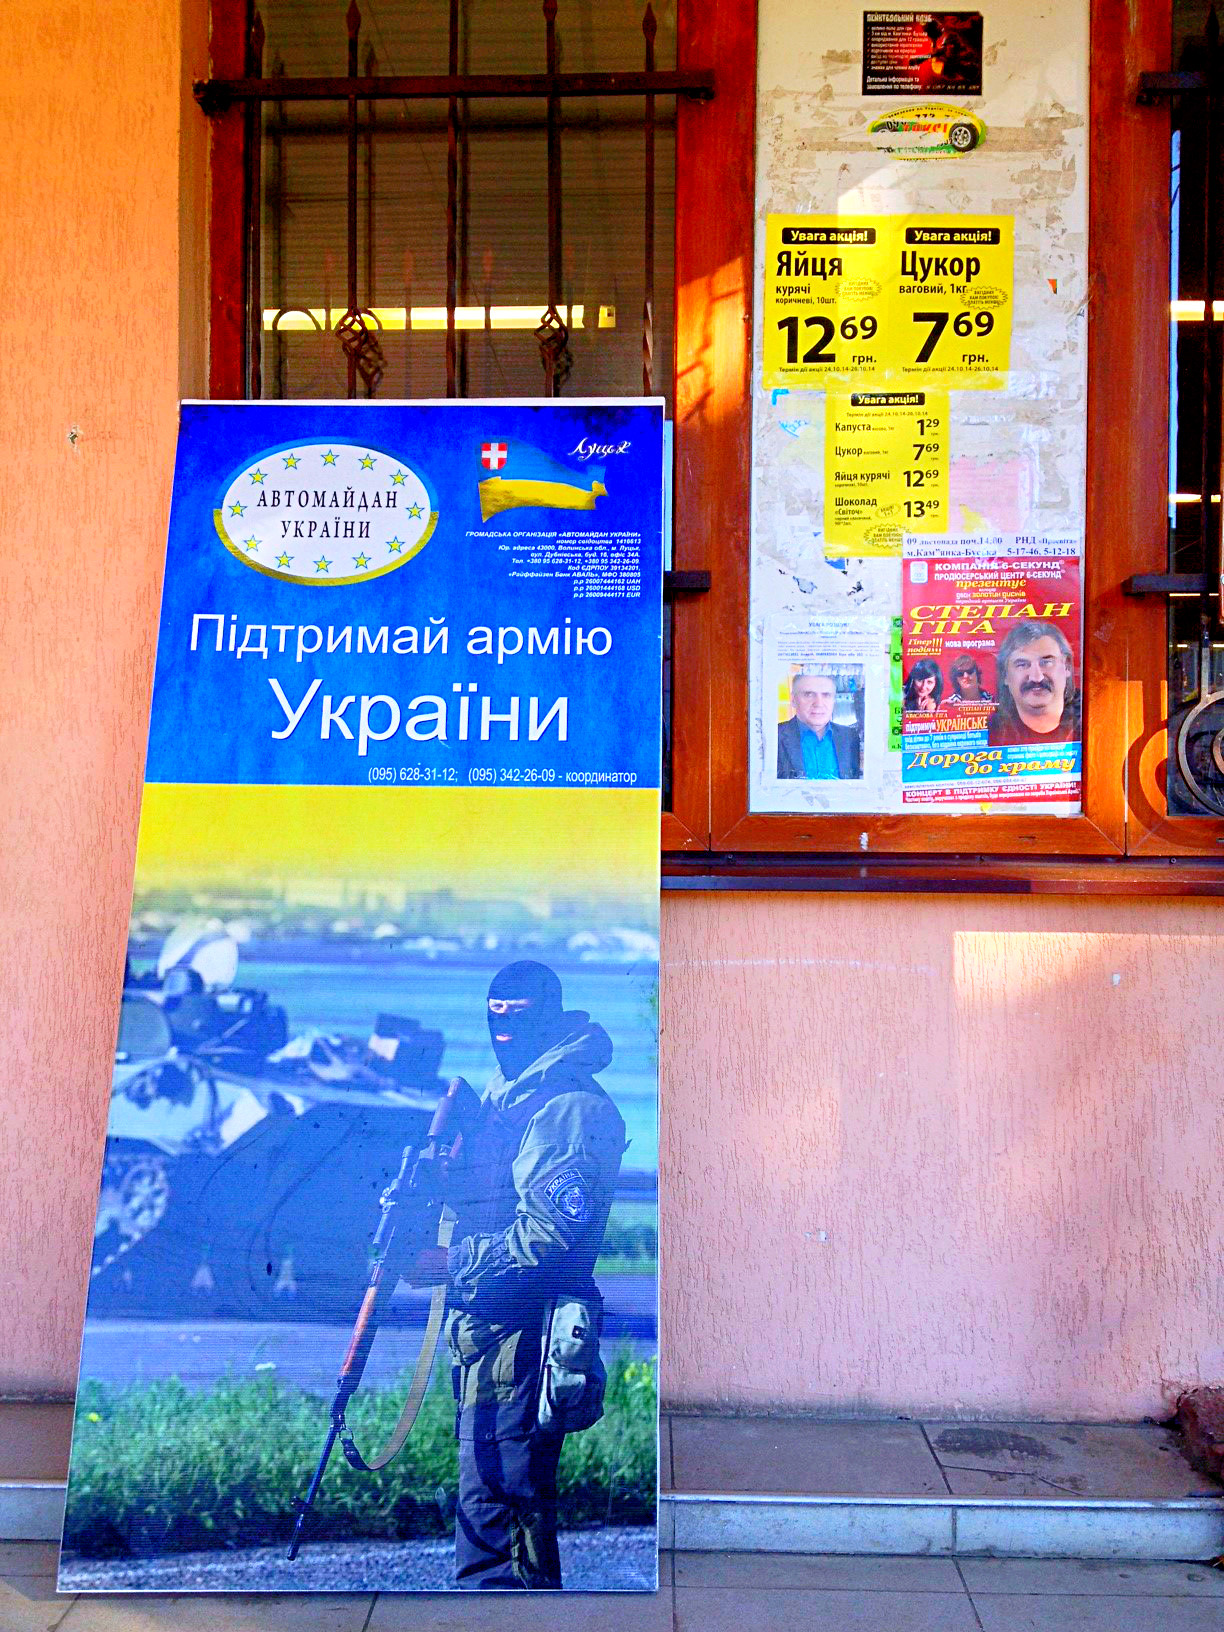 Ad of Ukrainian military outside convenience store near polling station